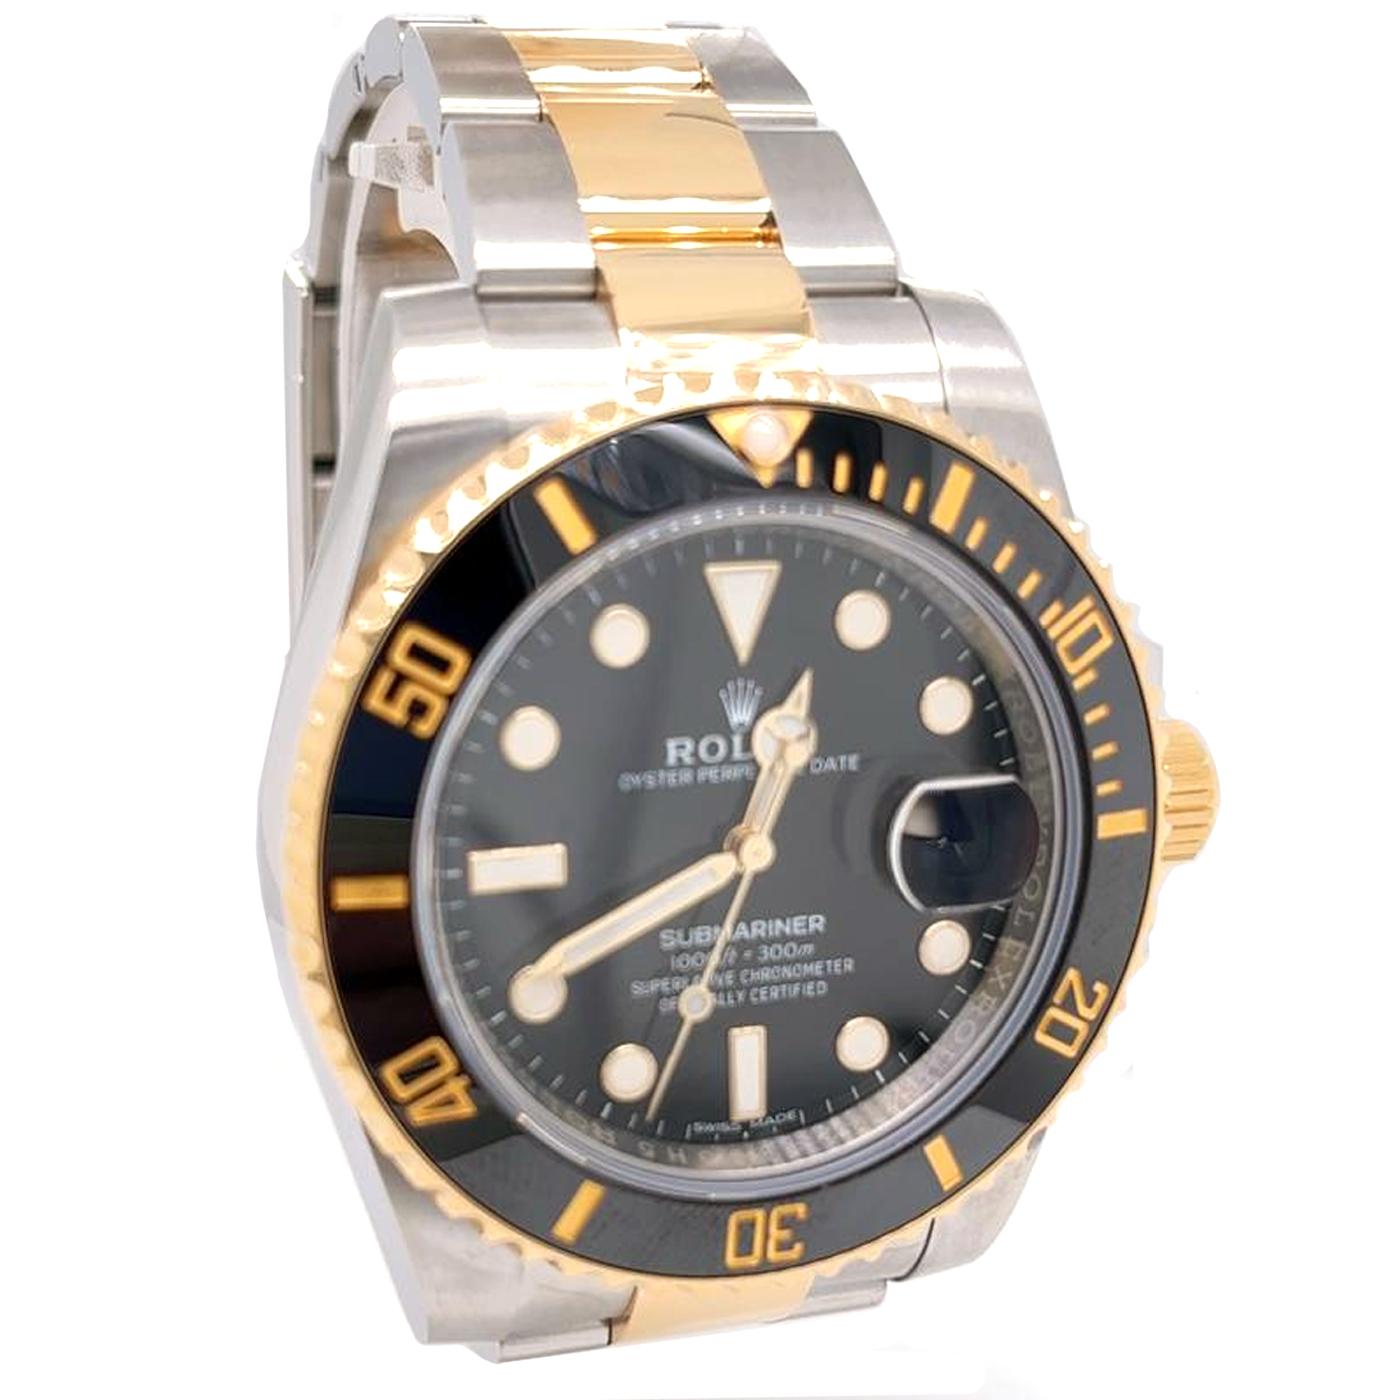 Rolex Submariner Date Two-Tone Gold Black Dive Ceramic Steel Watch 116613LN For Sale 2